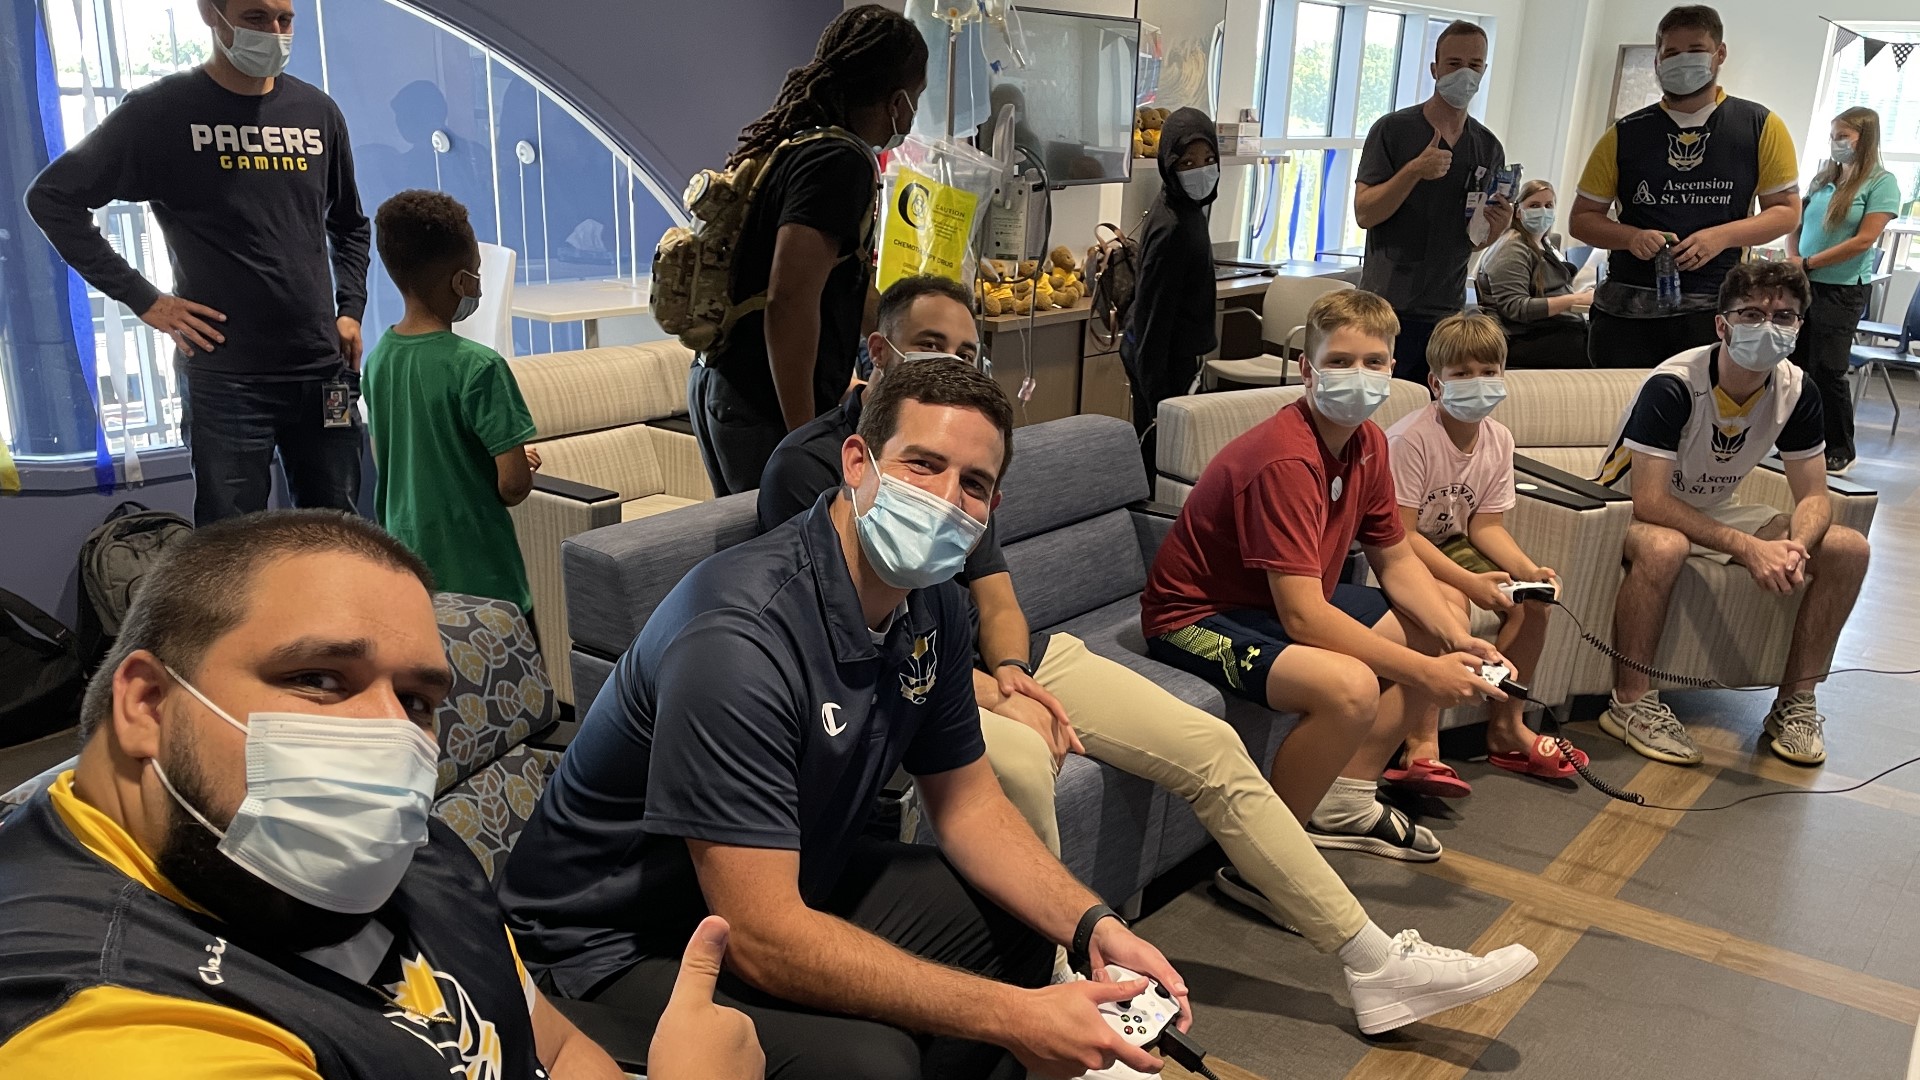 Just ahead of the league's 3v3 playoffs, members of the team took turns gaming with the kids and cheering each other on.